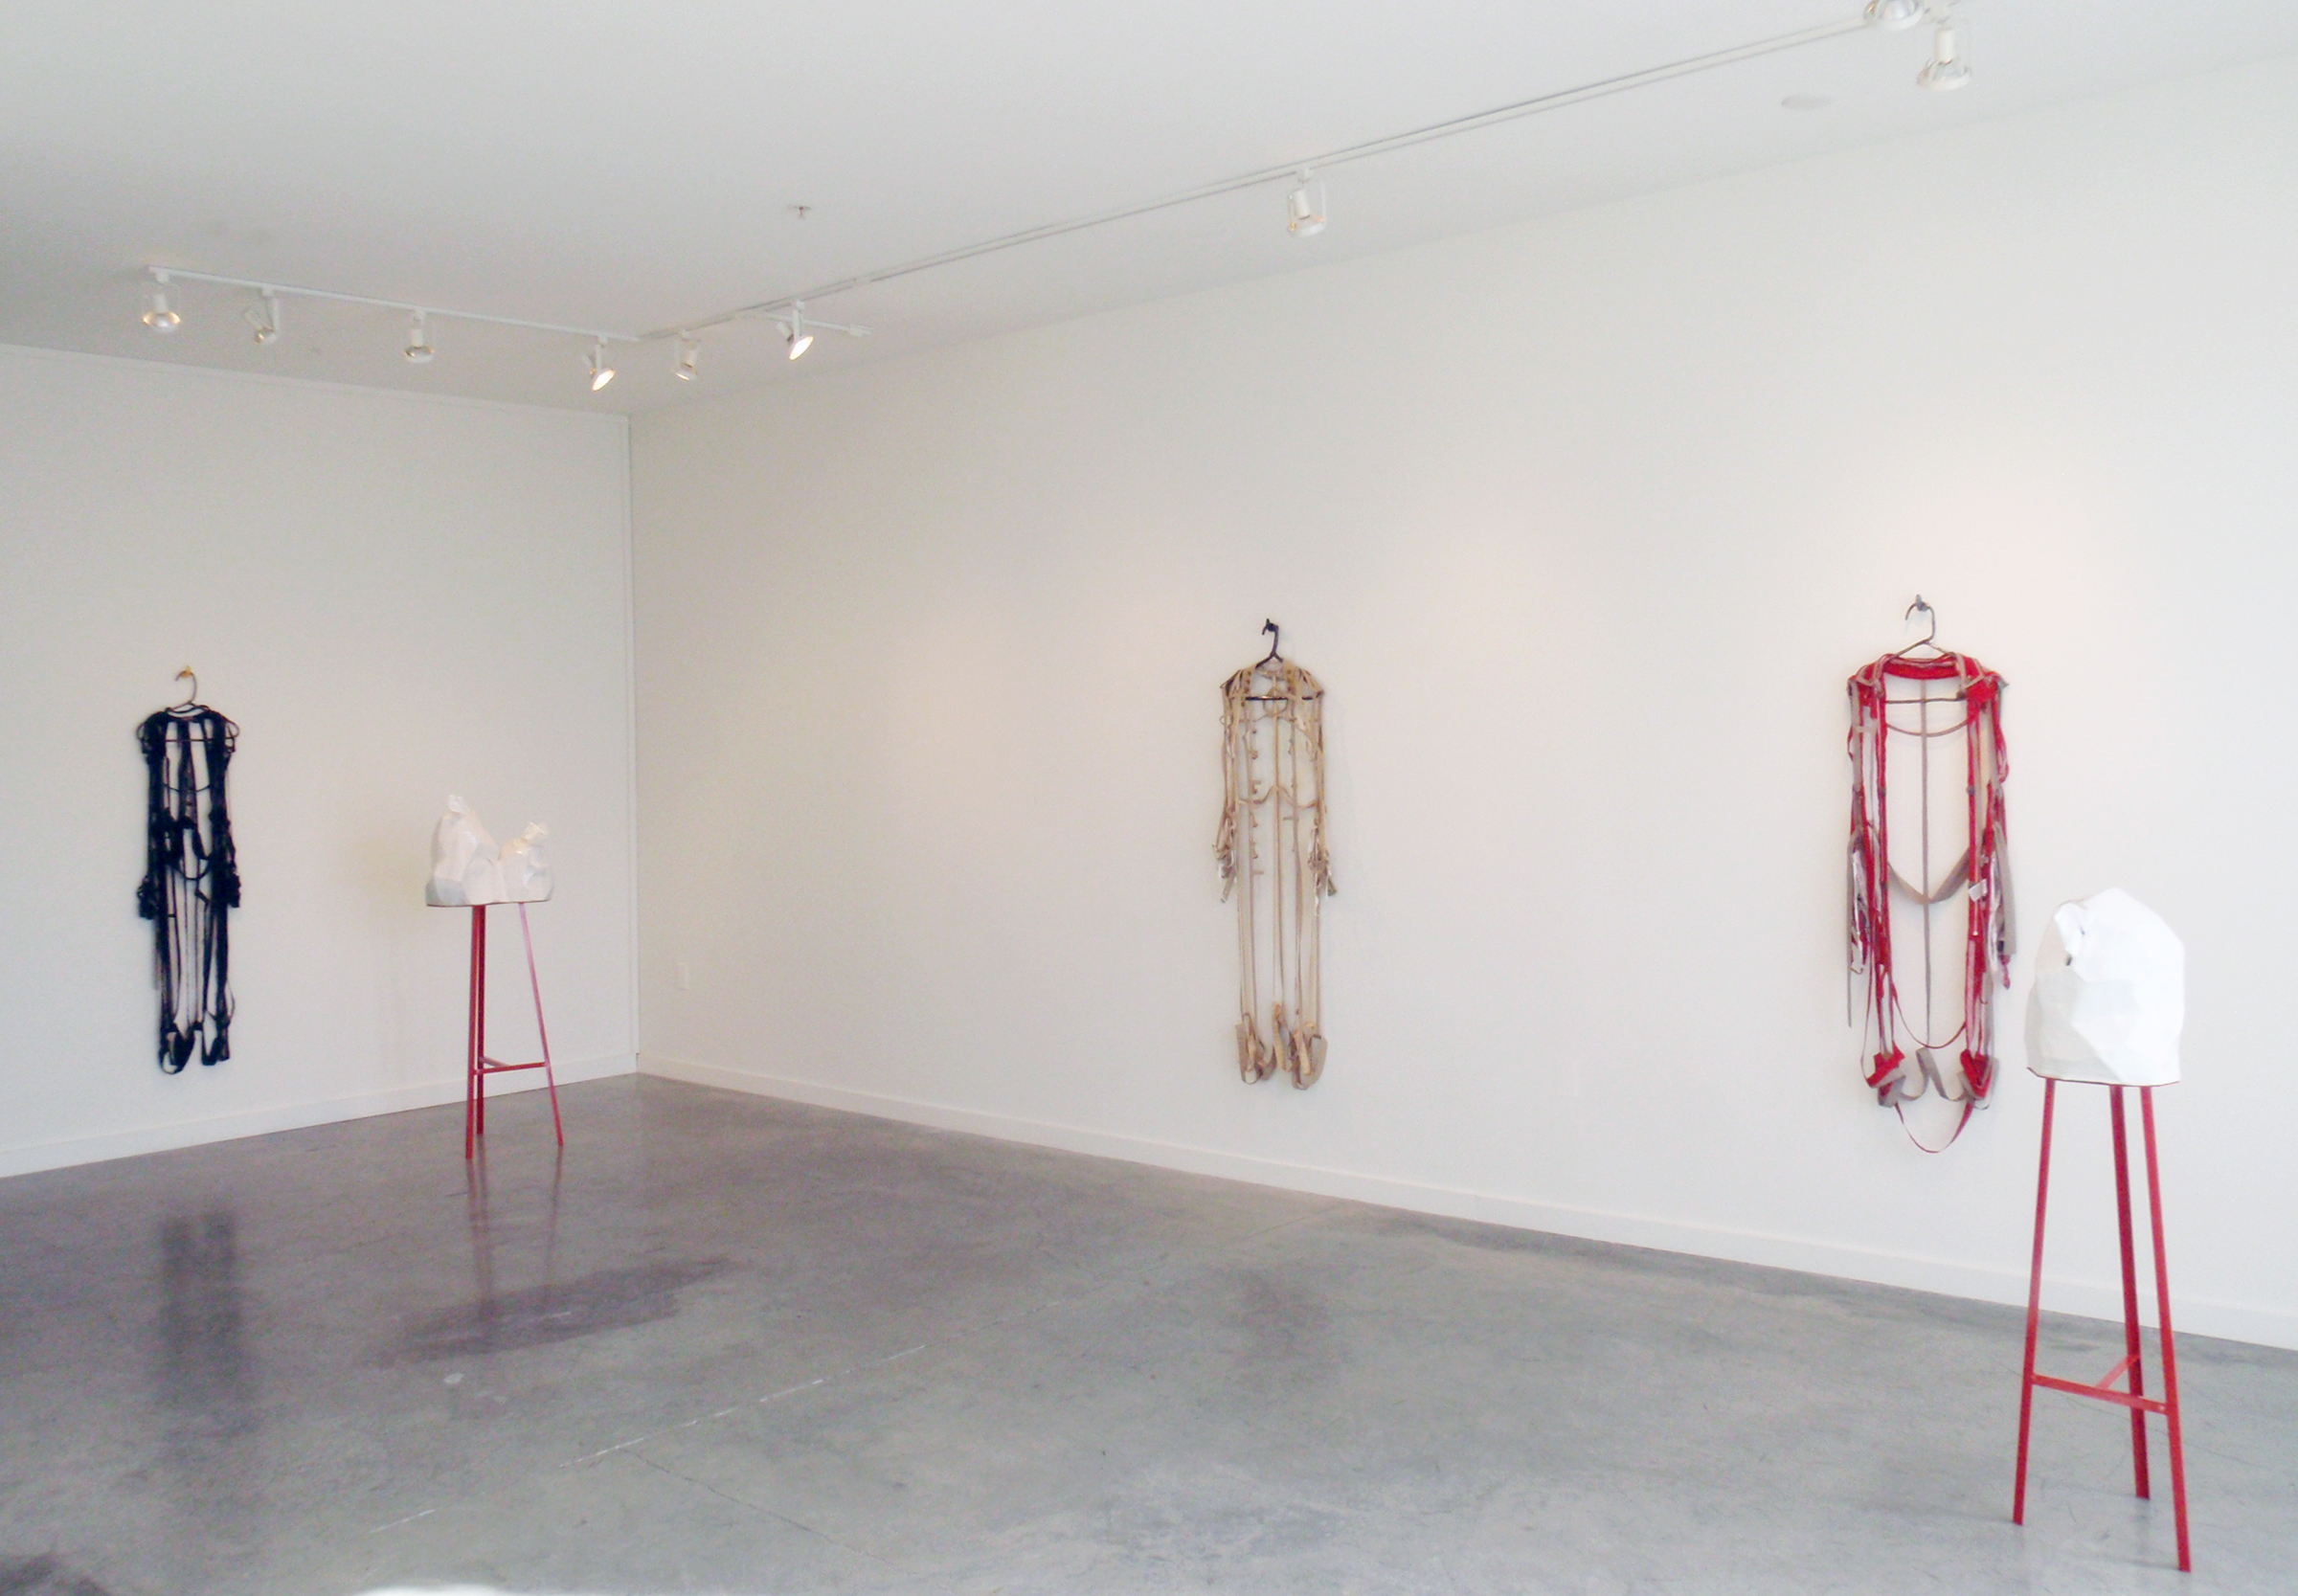   ANNA SEW HOY   Tissues and Trench Coats , installation 